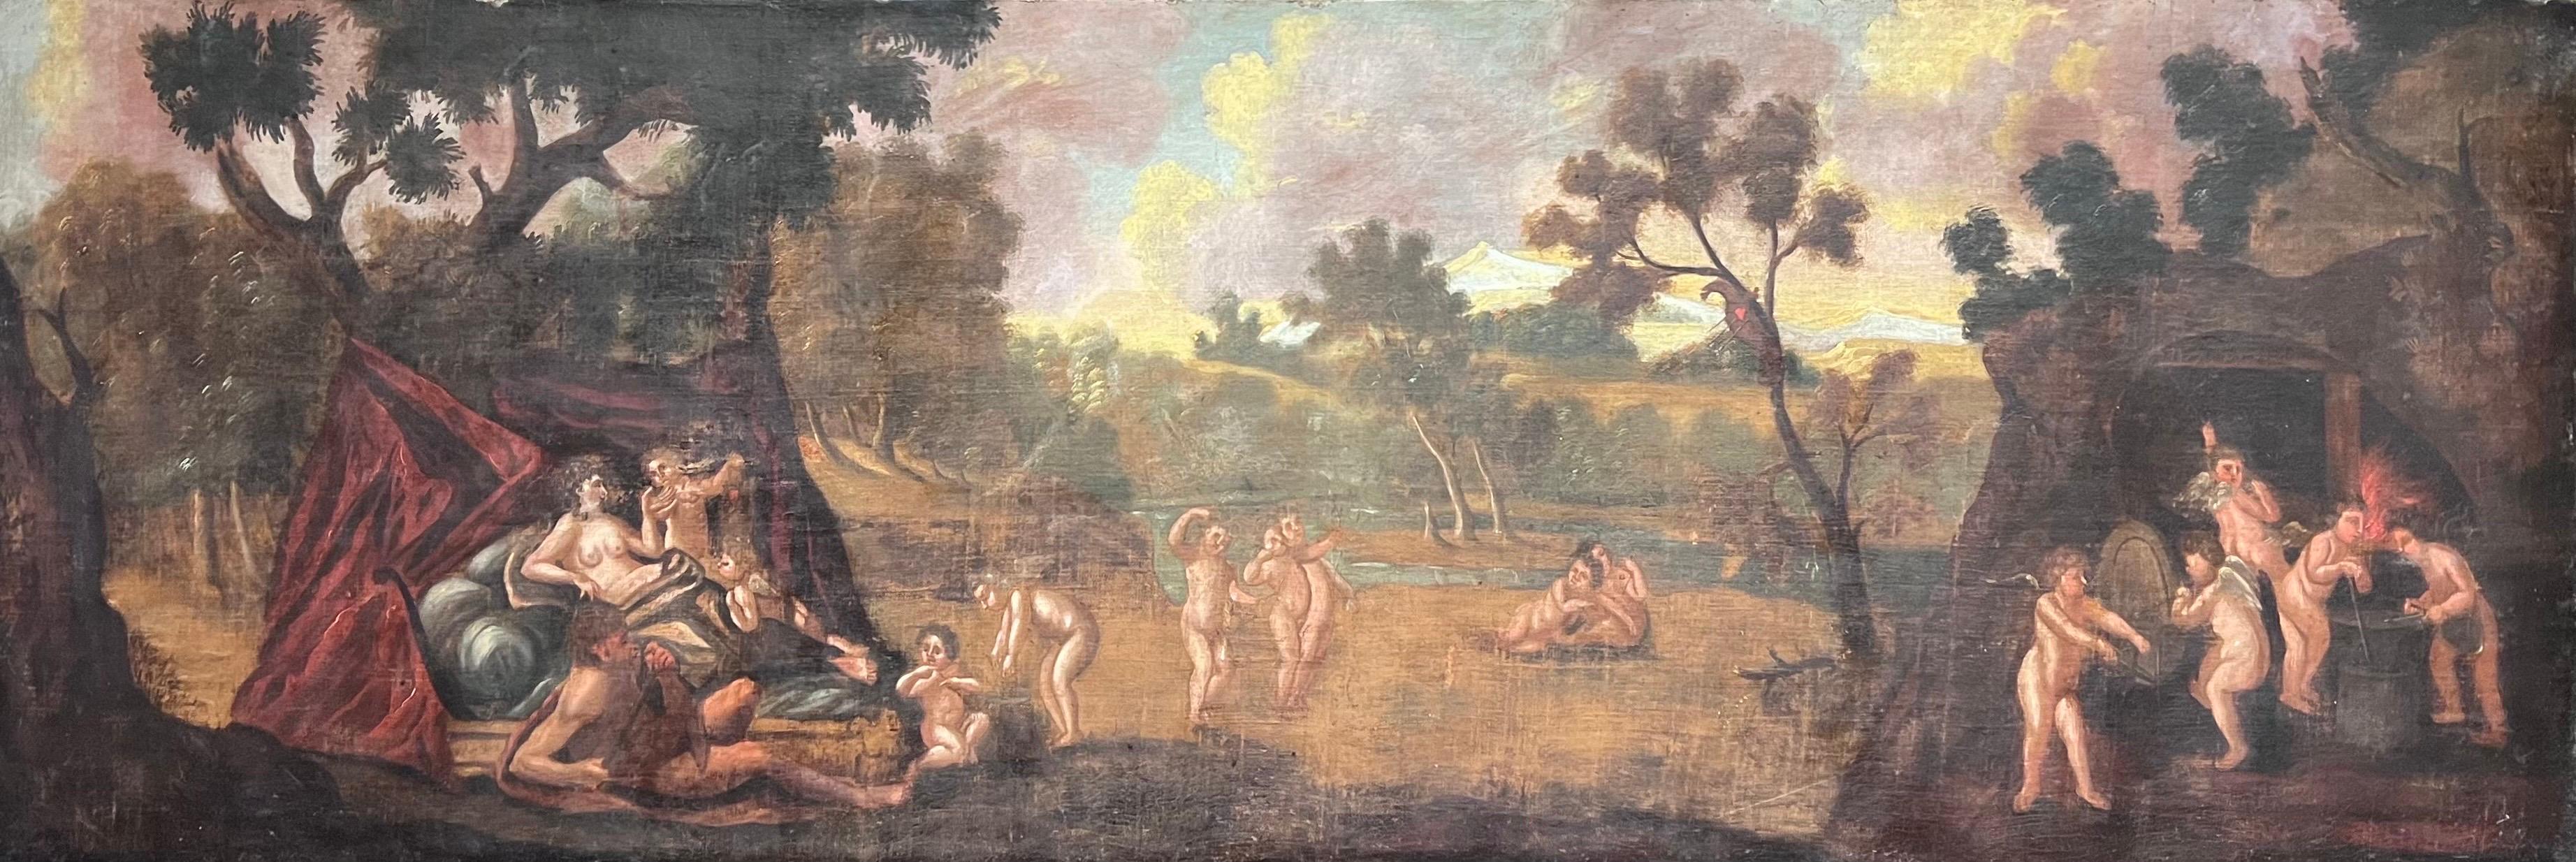 Northern European 17th Century Figurative Painting - Huge Old Master Oil Painting 17th century Diana & Cupids in Panoramic Landscape